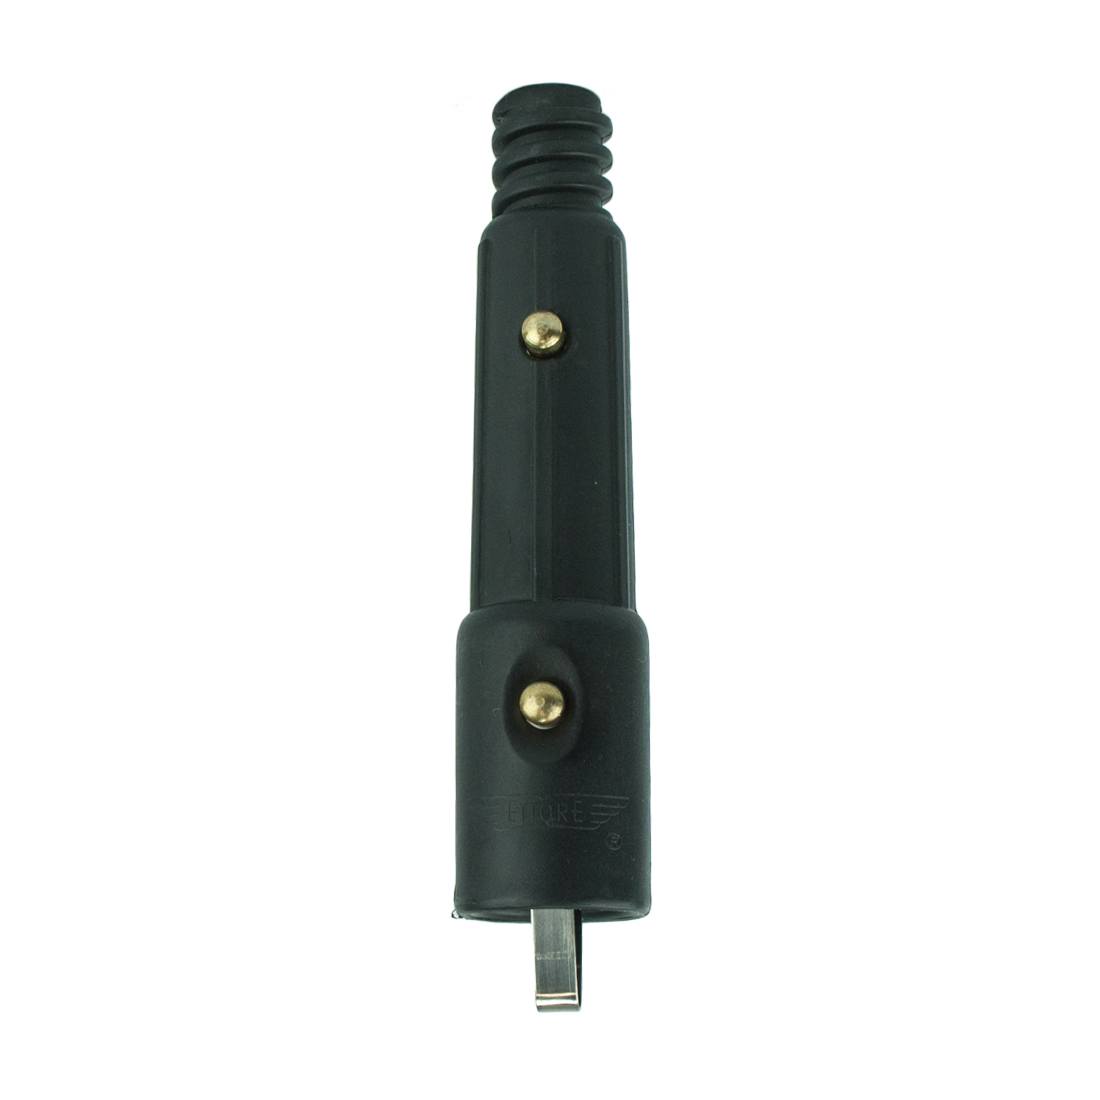 Ettore Pro+ Pole Tip Upright Side View